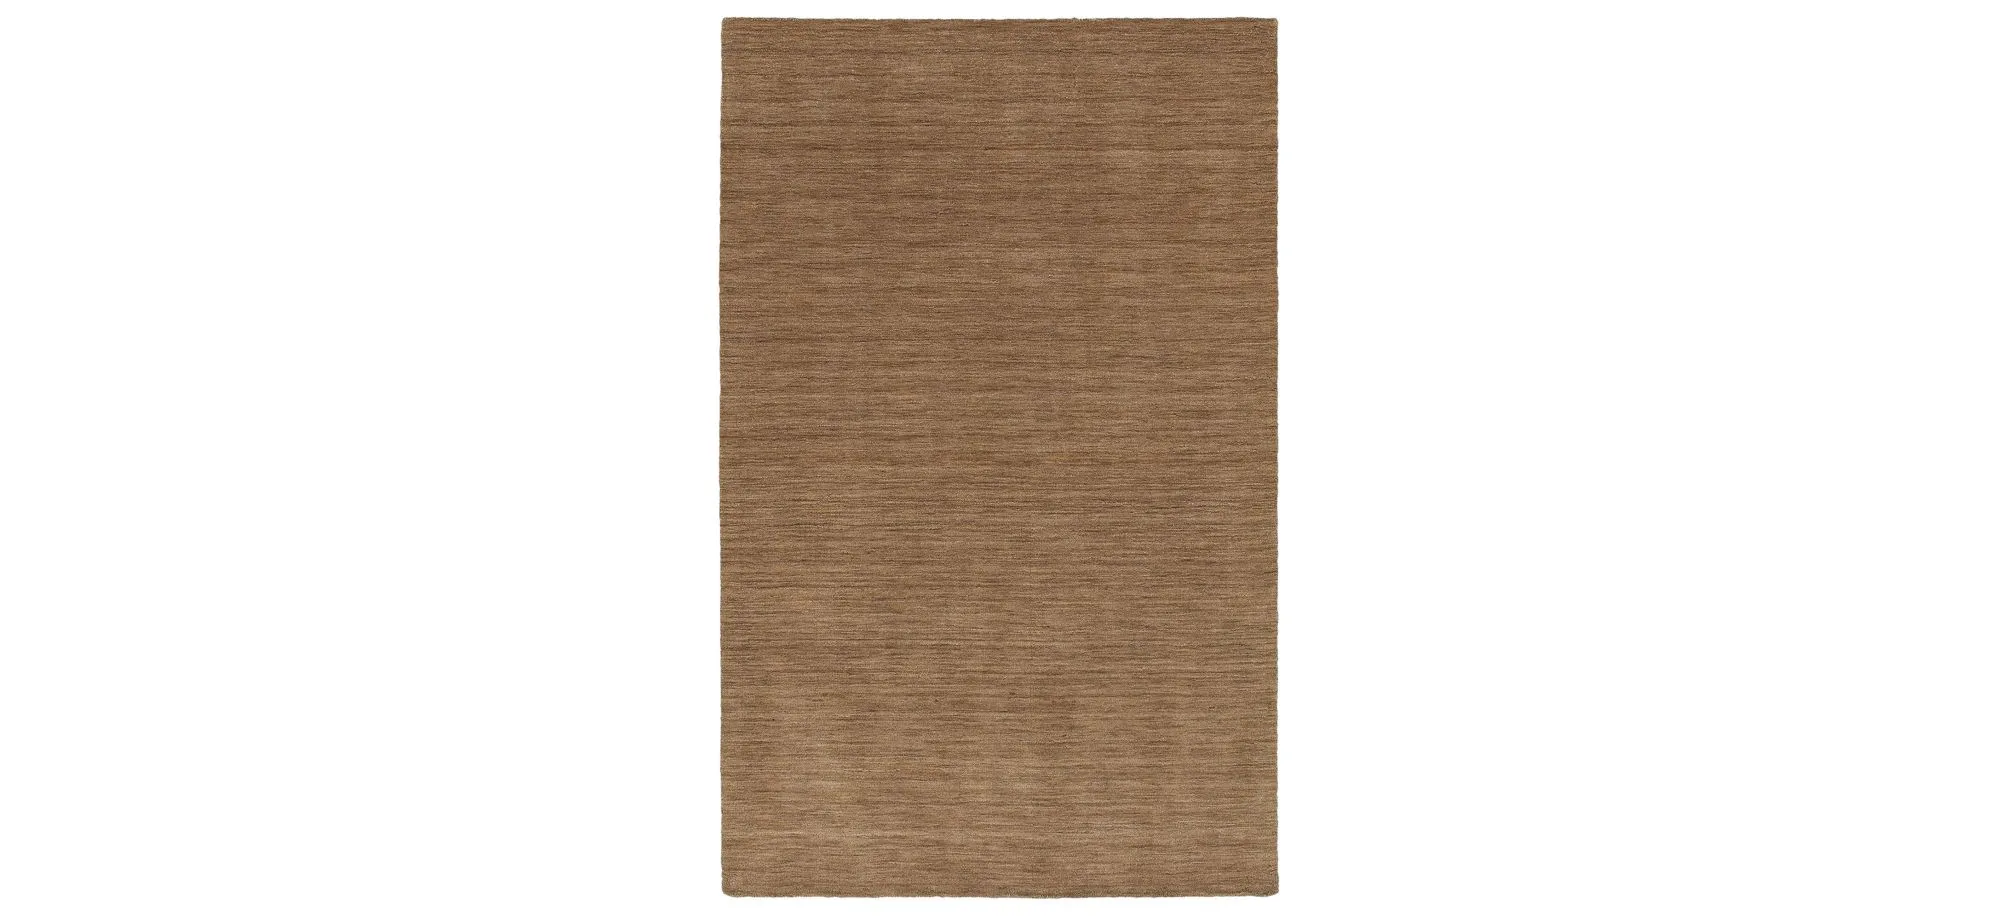 Chelsea Area Rug in Camel by Bellanest